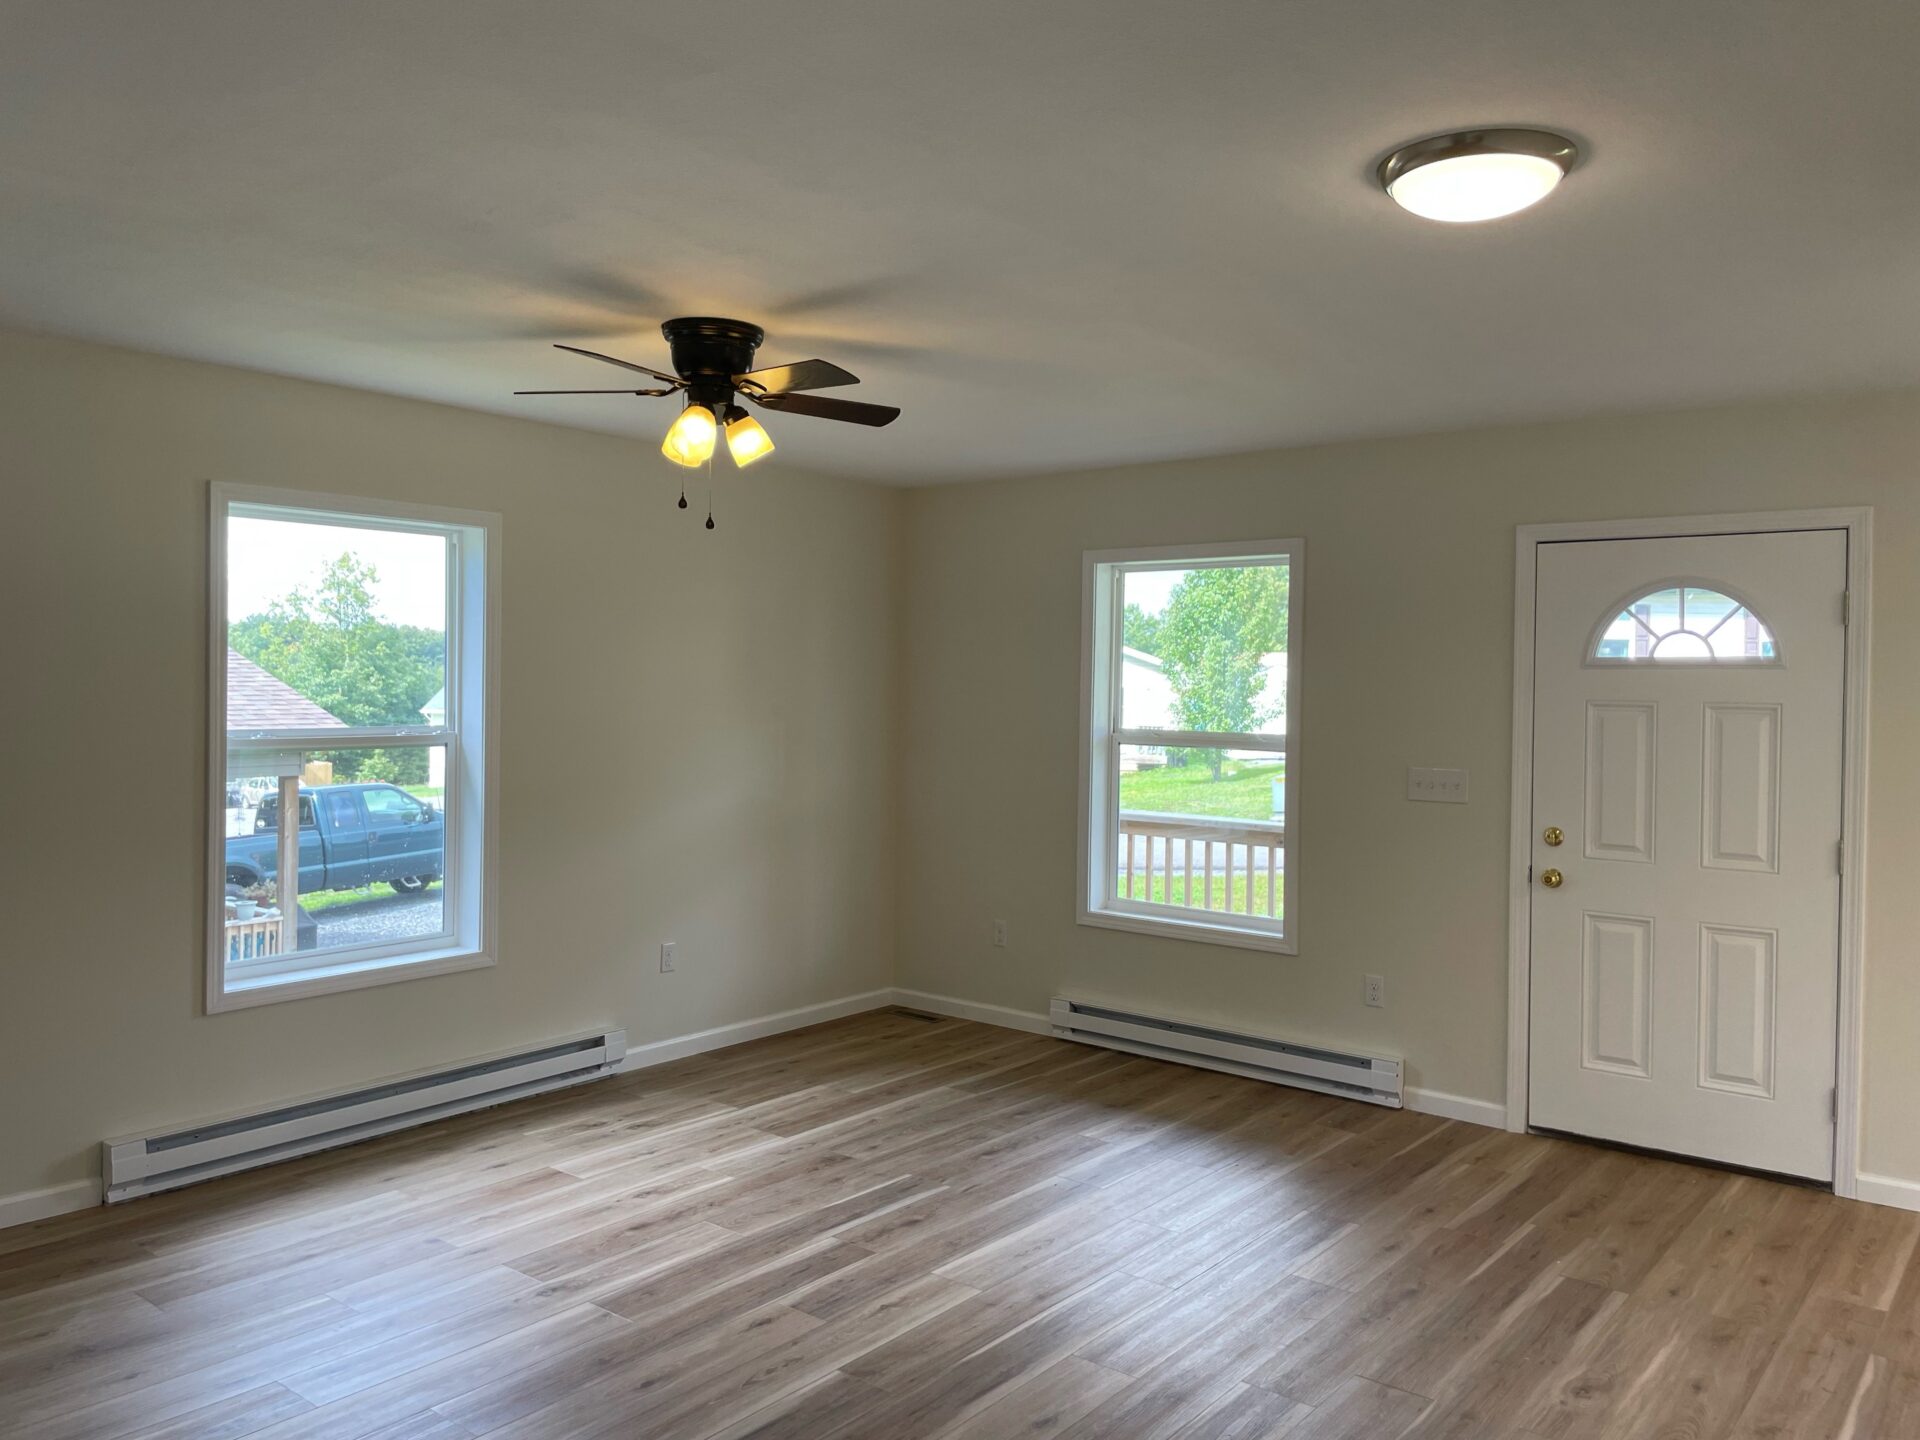 A room with hard wood floors and a ceiling fan.